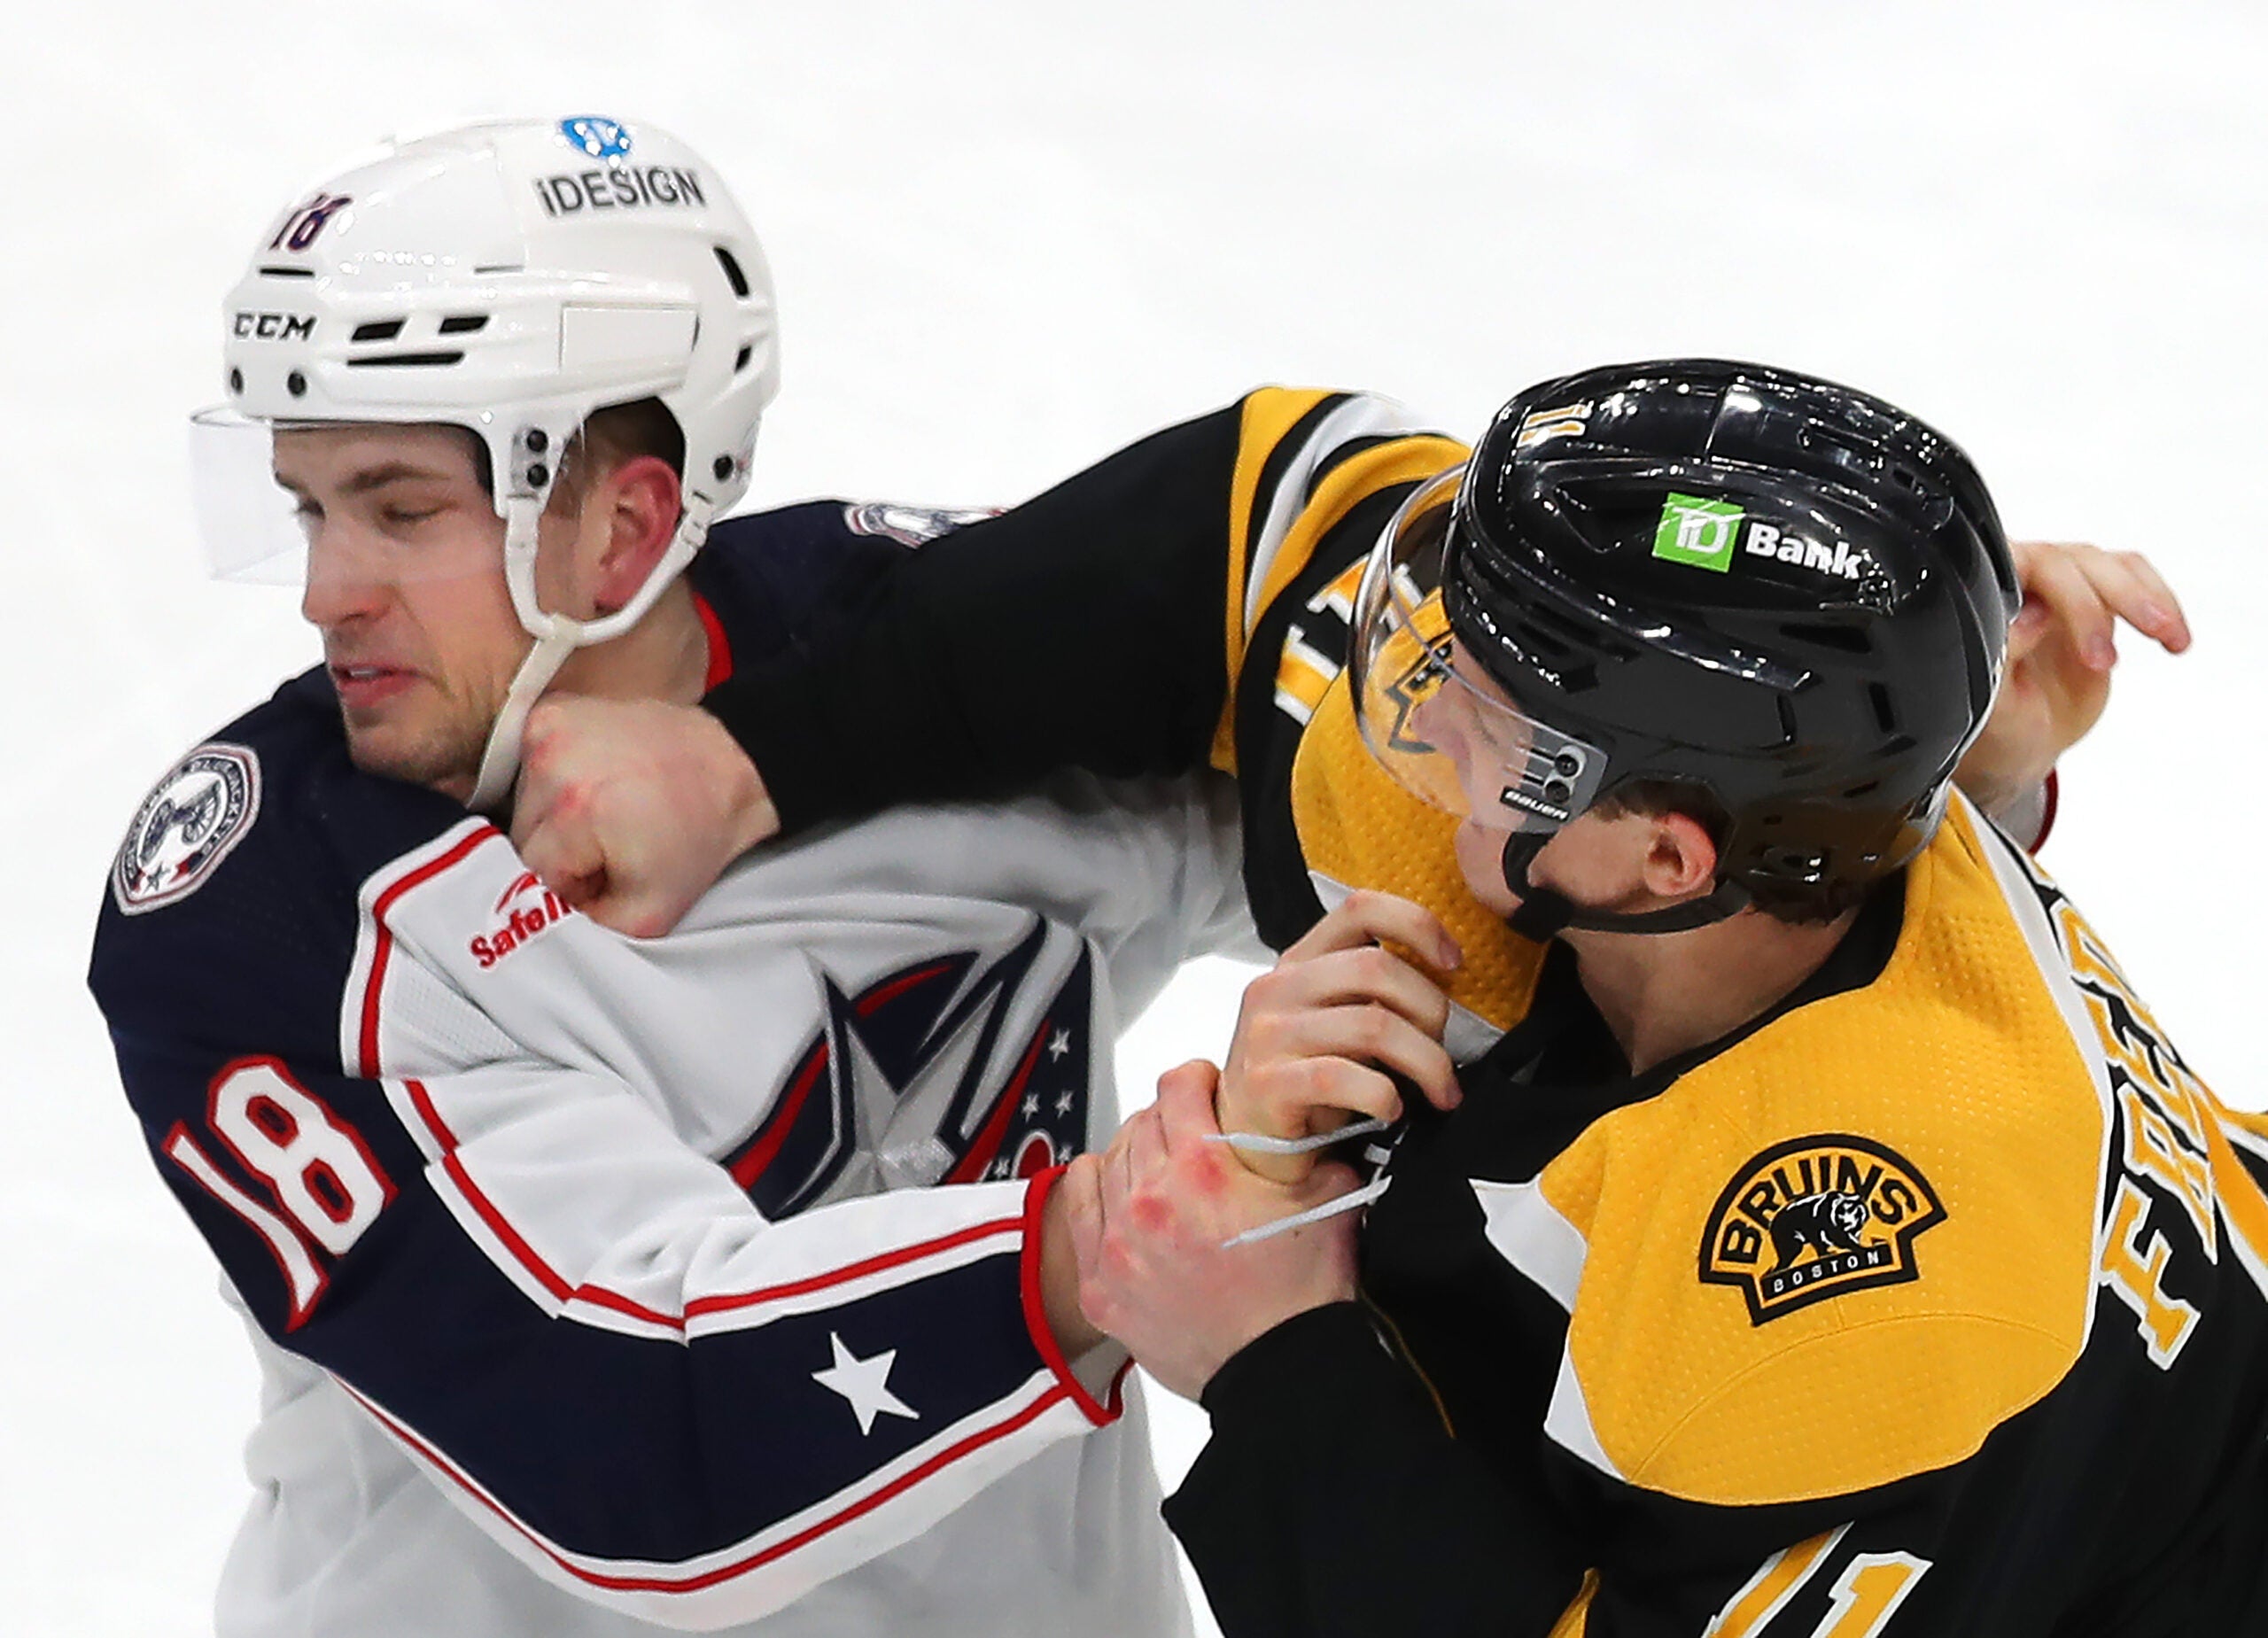 The 2nd period fight ended in one punch thrown by Boston Bruins center Trent Frederic (11) into the chin of Columbus Lane Pederson which knocked him to the ice.